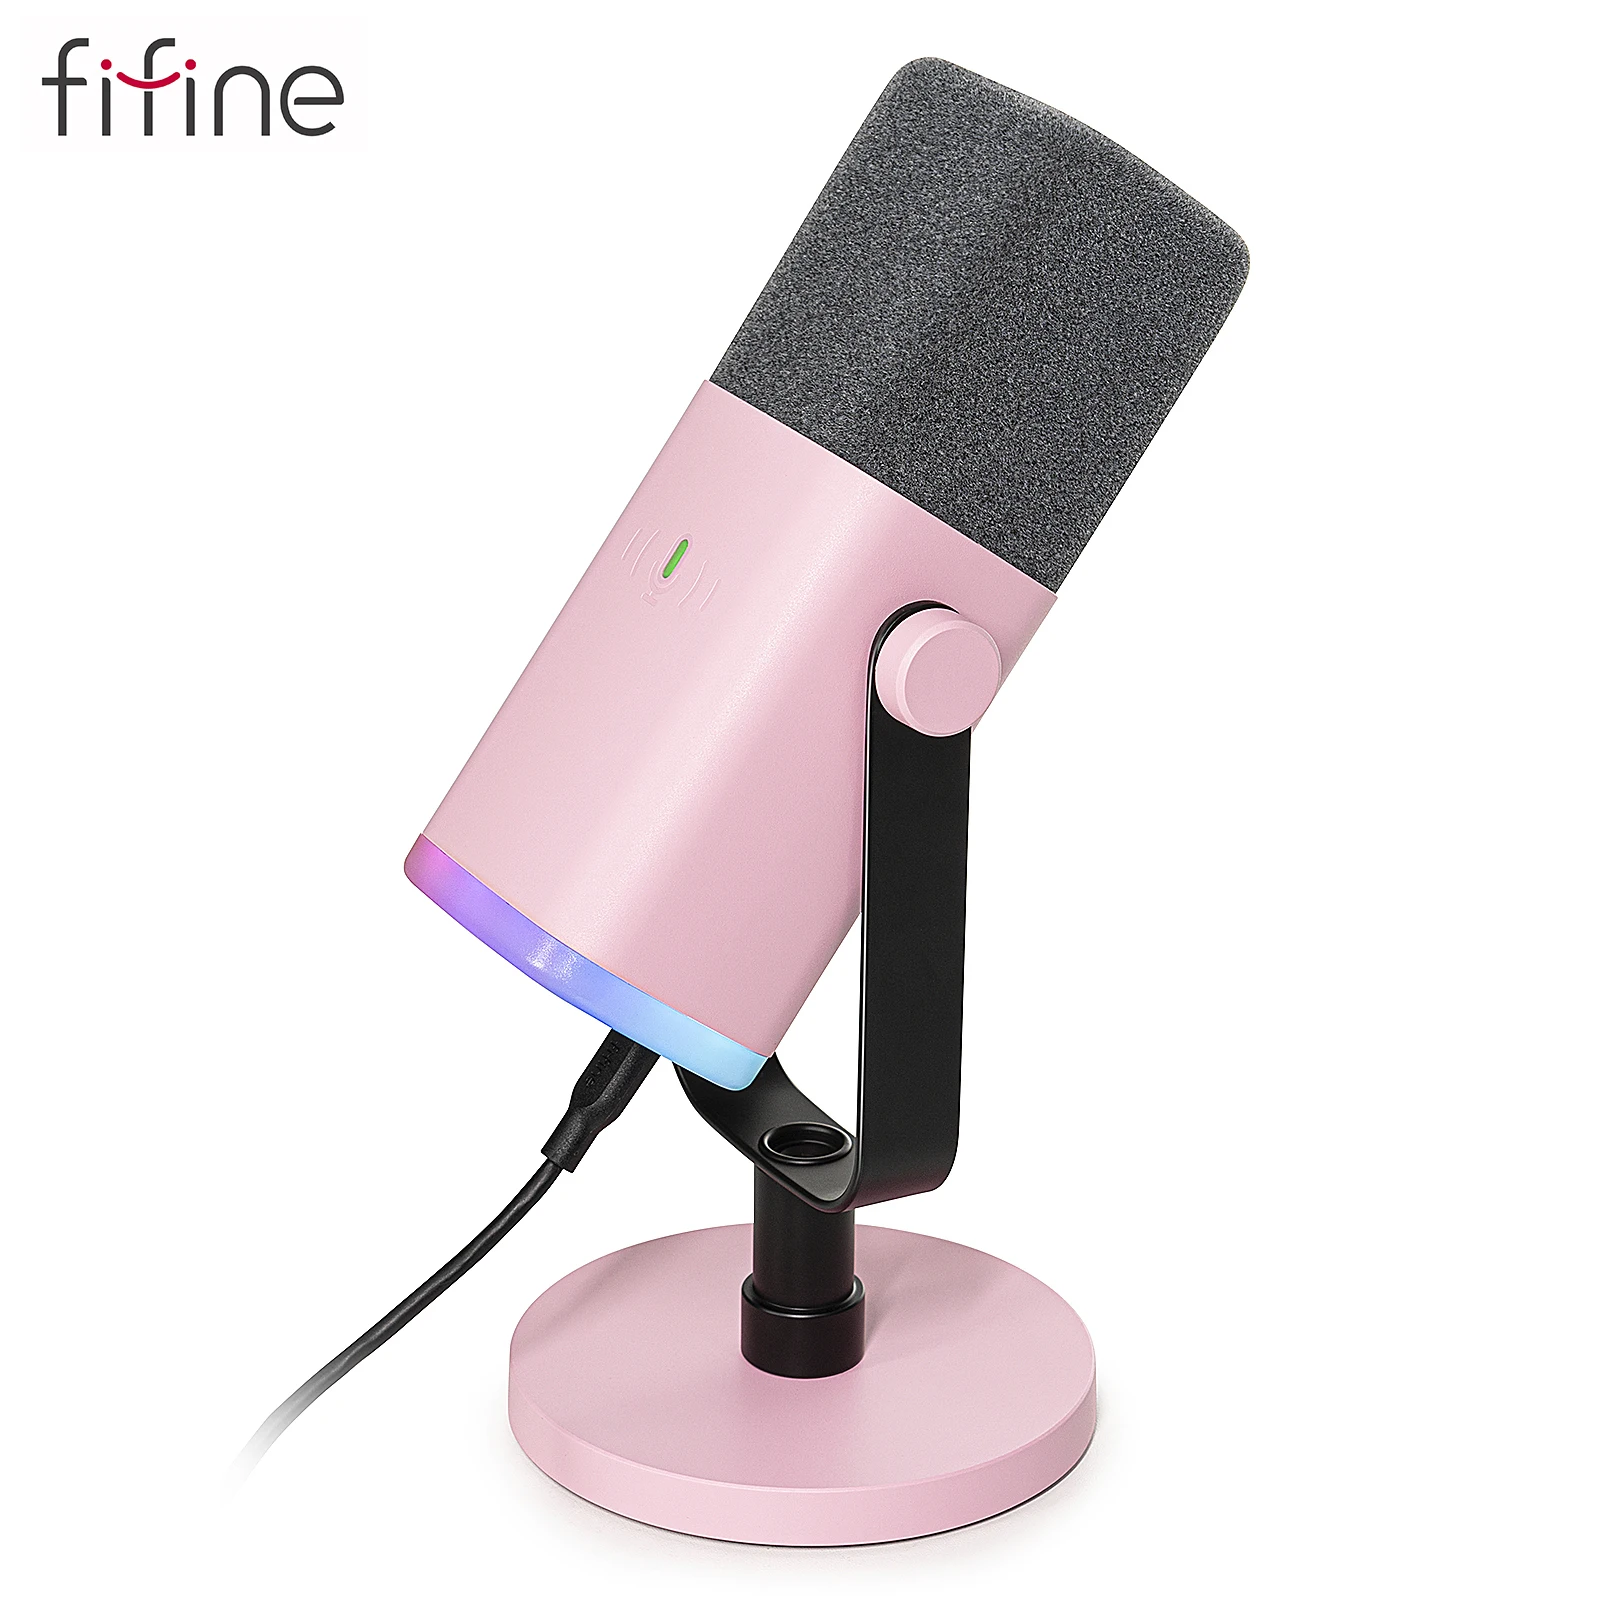 Fifine AM8 Microphone Review - My New Favorite Mic Under 60